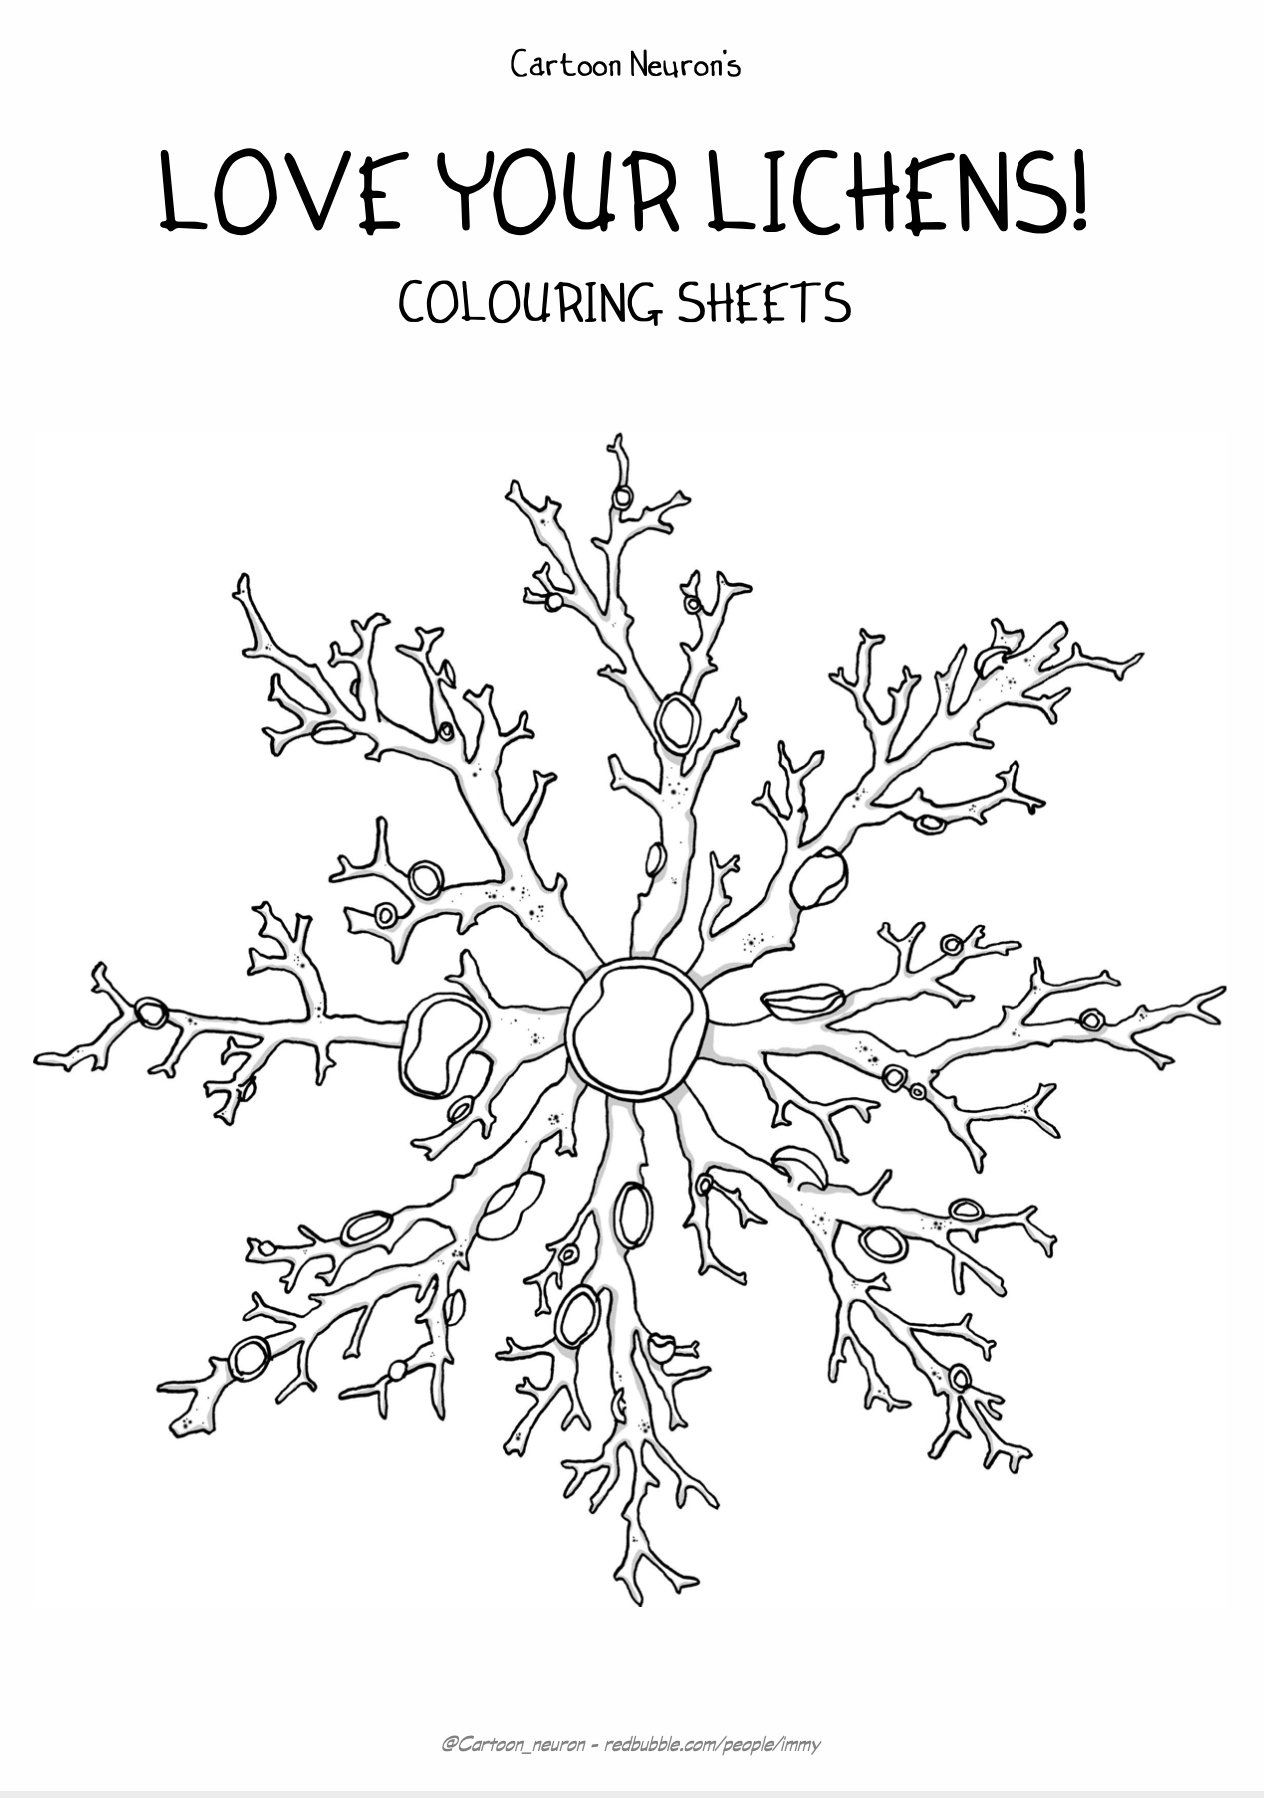 Covid 19 Coloring Pages For Kids   Download Poster